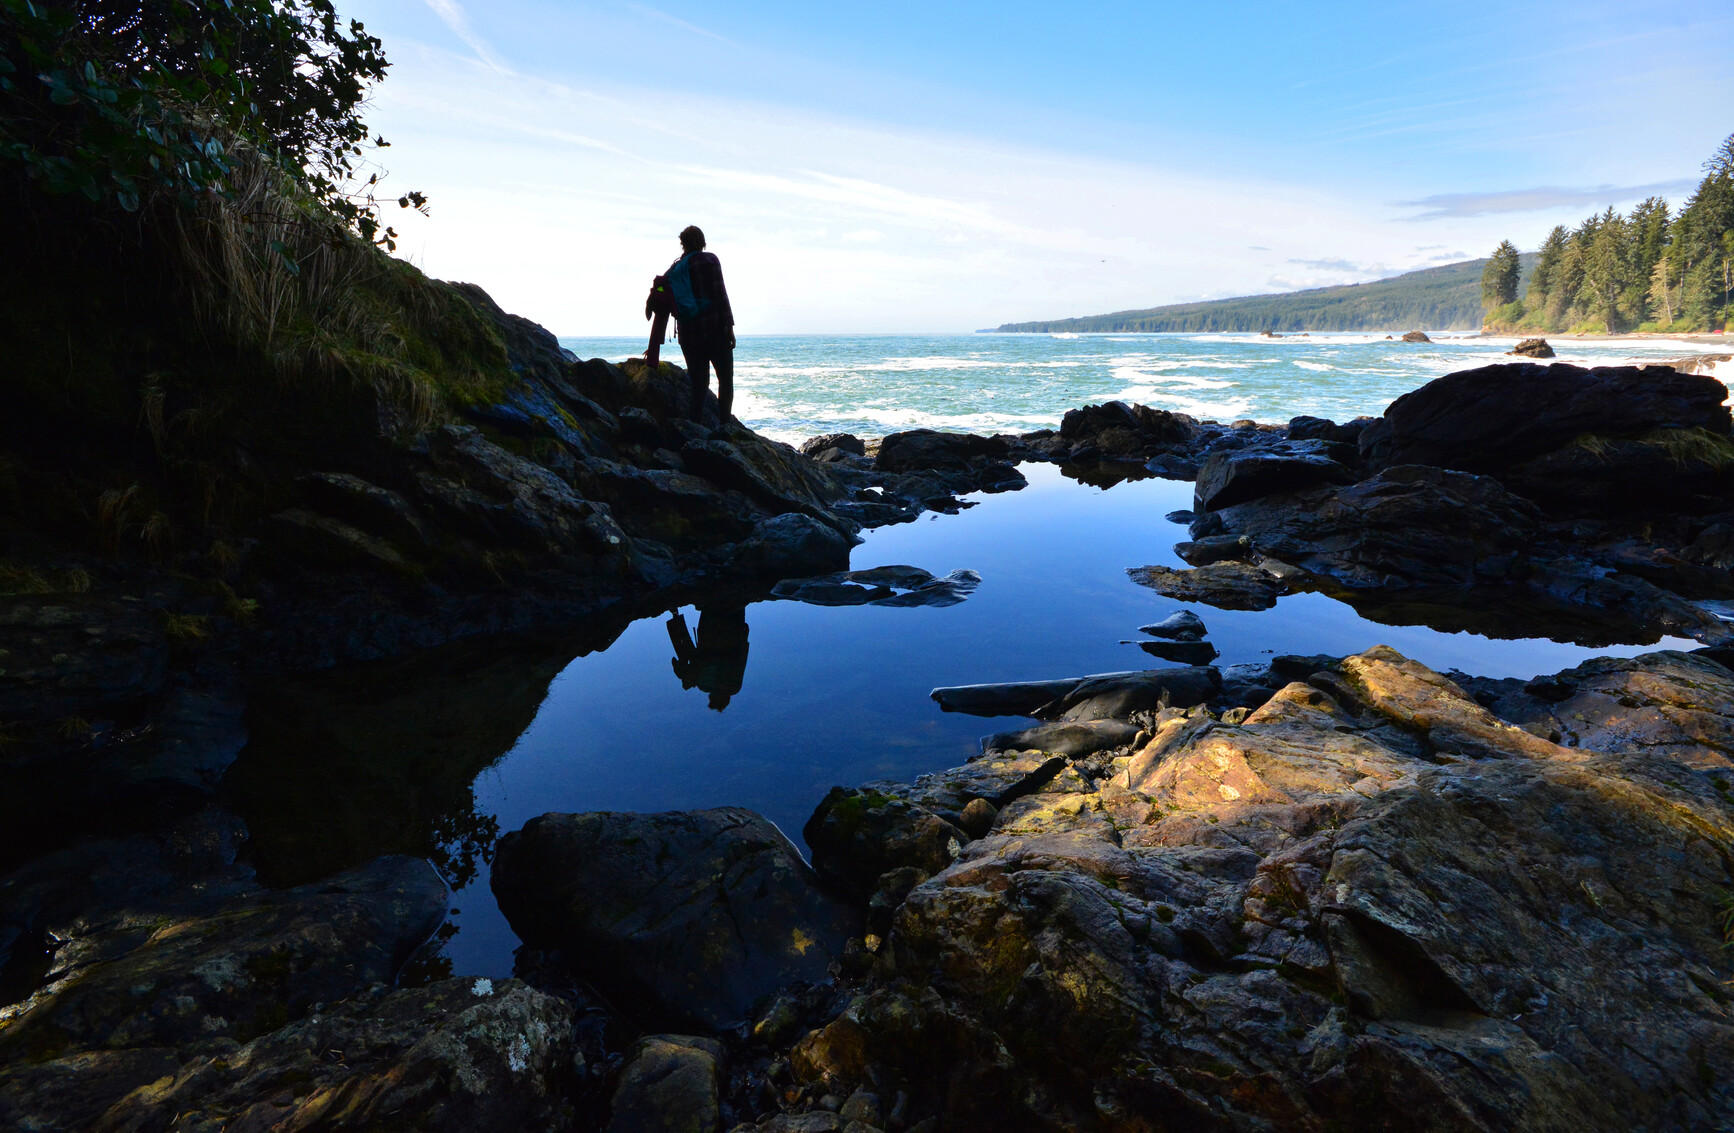 The silhouette of a hiker in the shade by a tide pool looking out at the ocean view, with the backdrop of mountains and forest. Sombrio Point in Juan De Fuca Park.